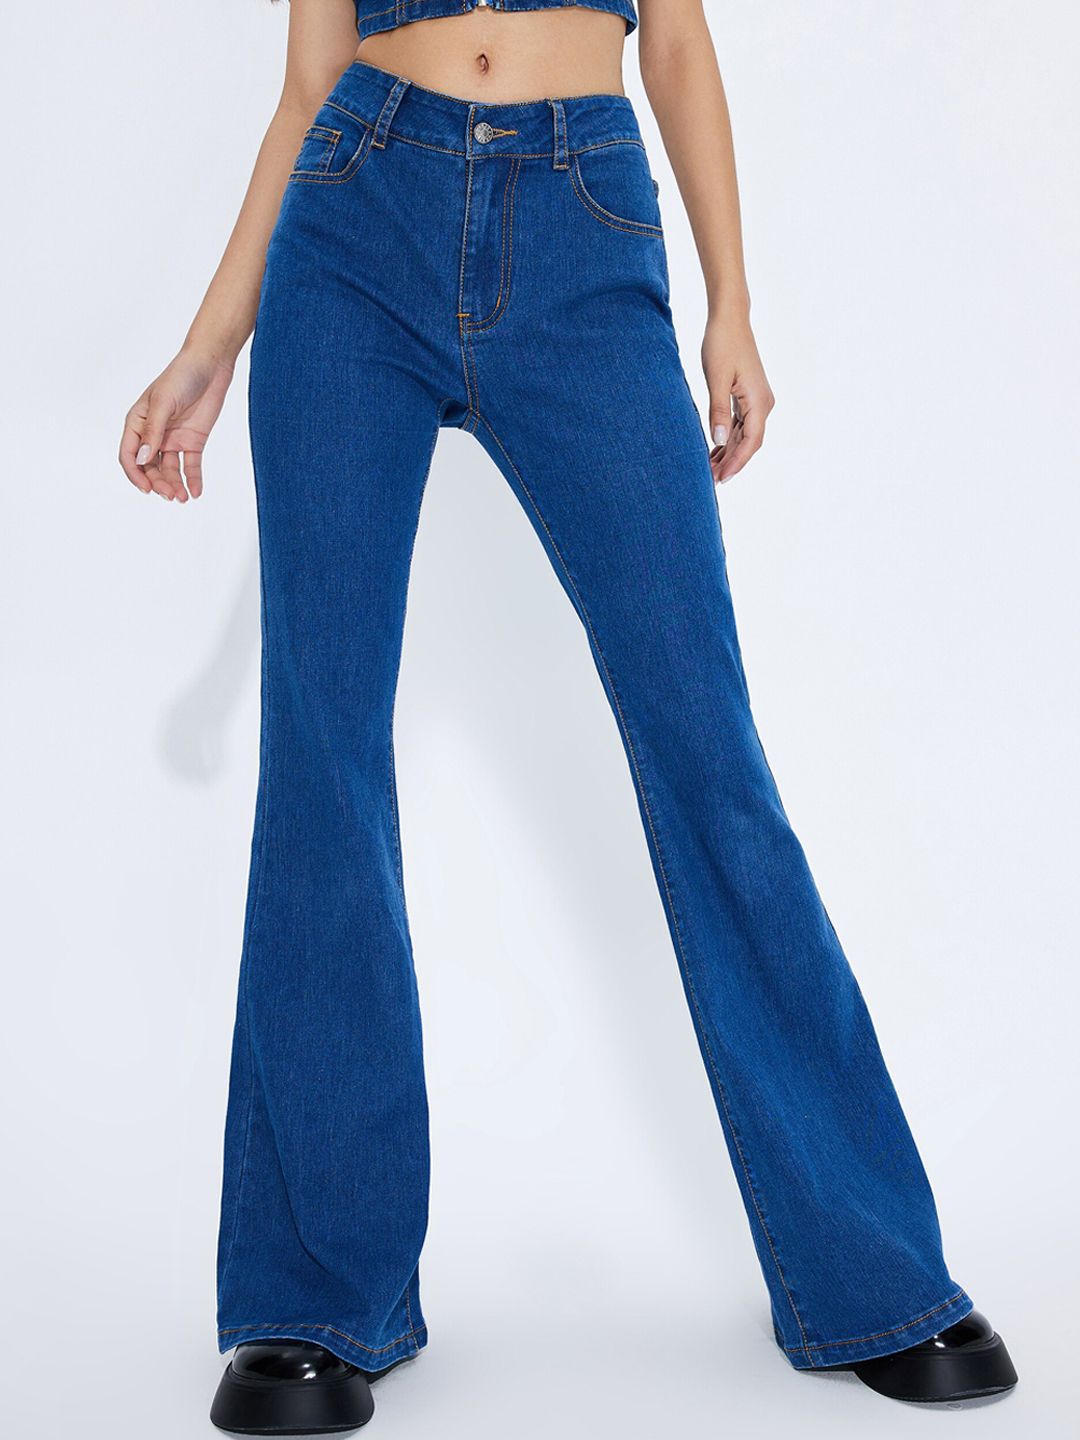 URBANIC Women Blue Flared High-Rise Jeans Price in India